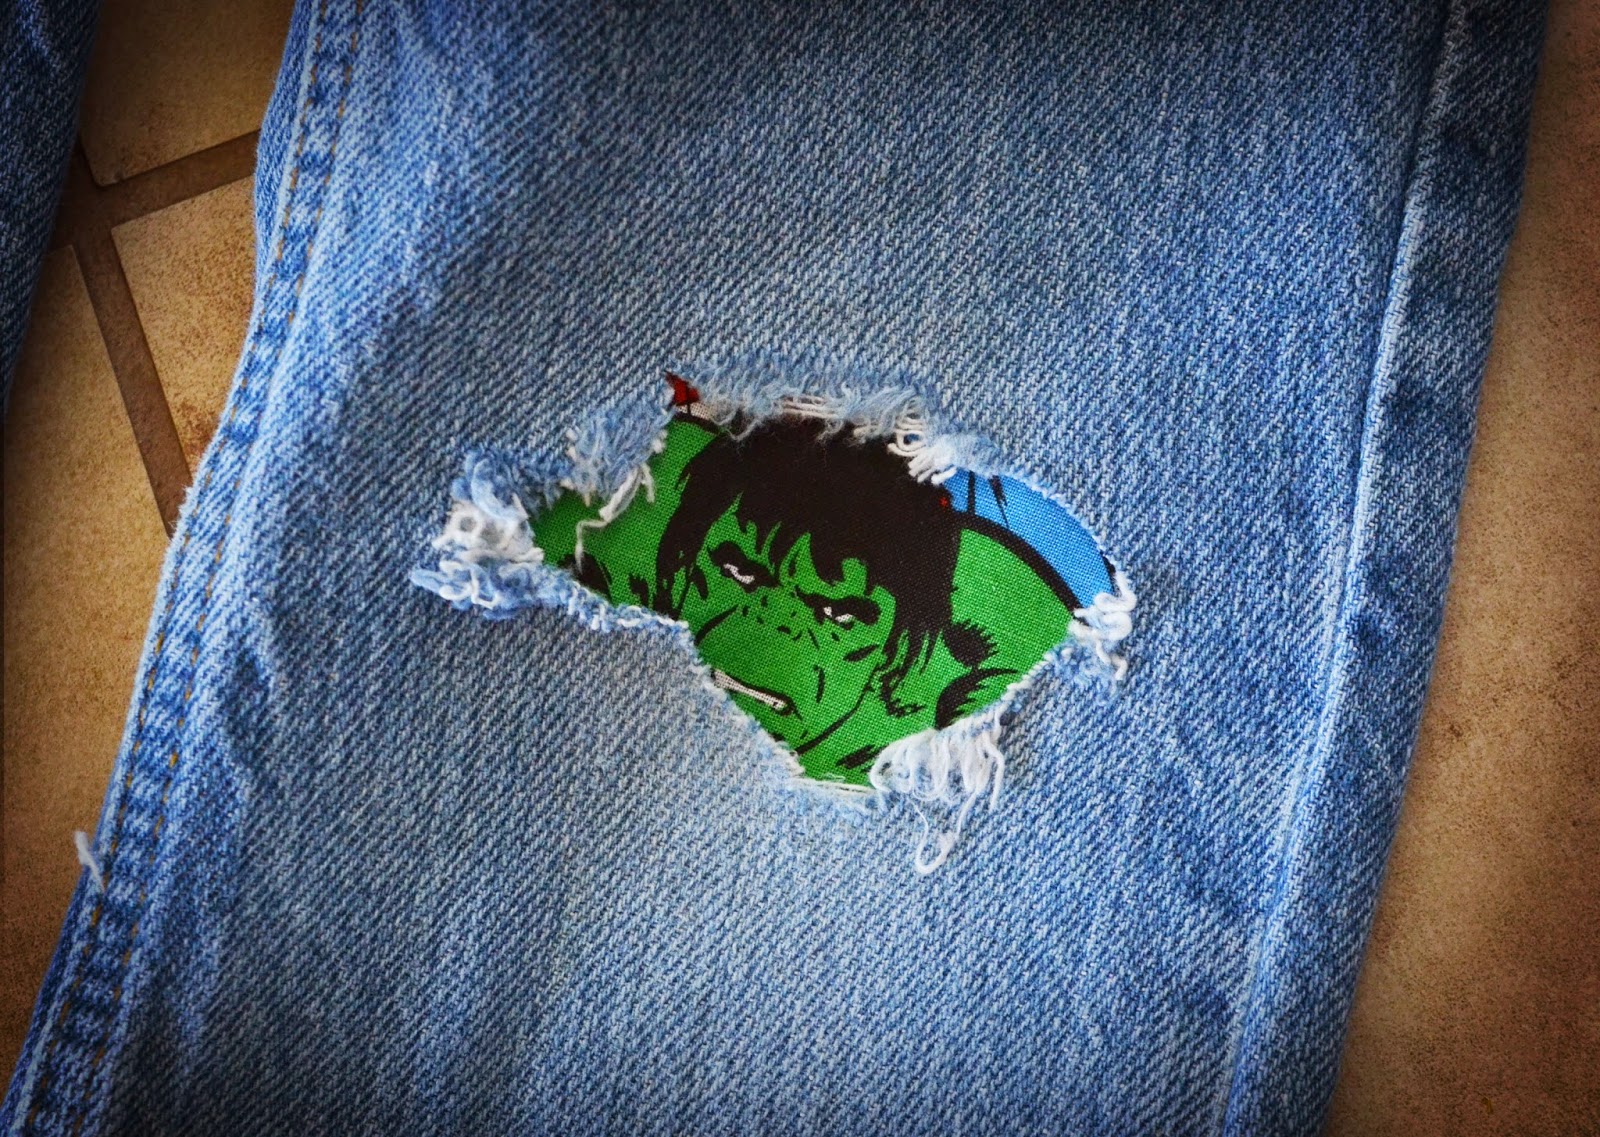 Custom-DIY-Iron-On-Patches-for-Jeans---Tutorial-by-Smile-Like-You-Mean-It